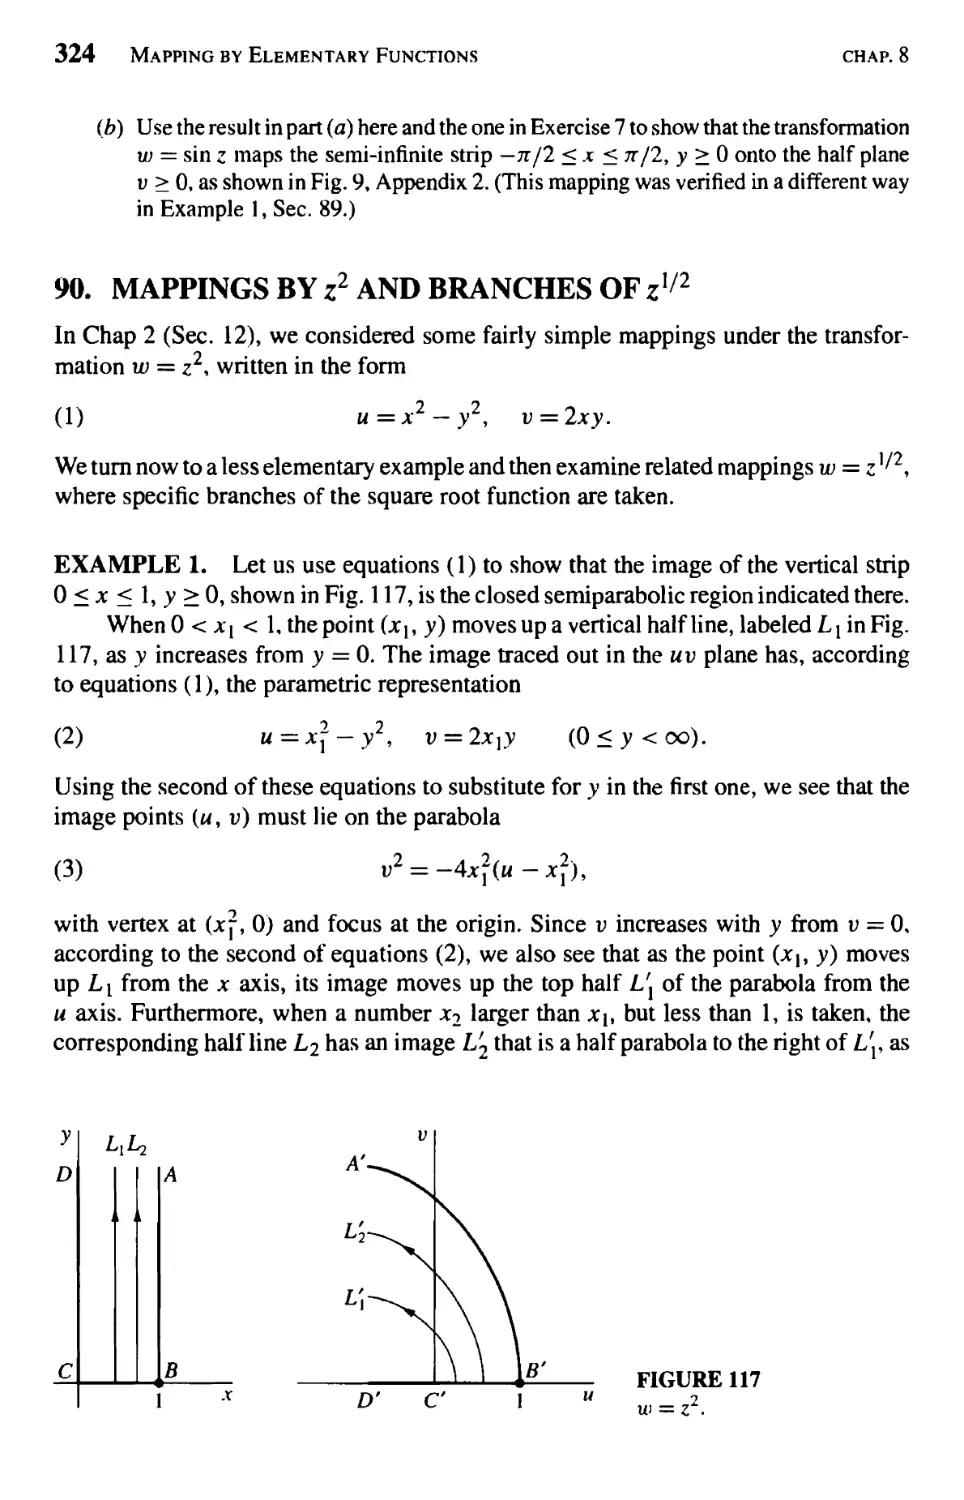 Mappings by $z^2$ and Branches of $z^{1/2}$